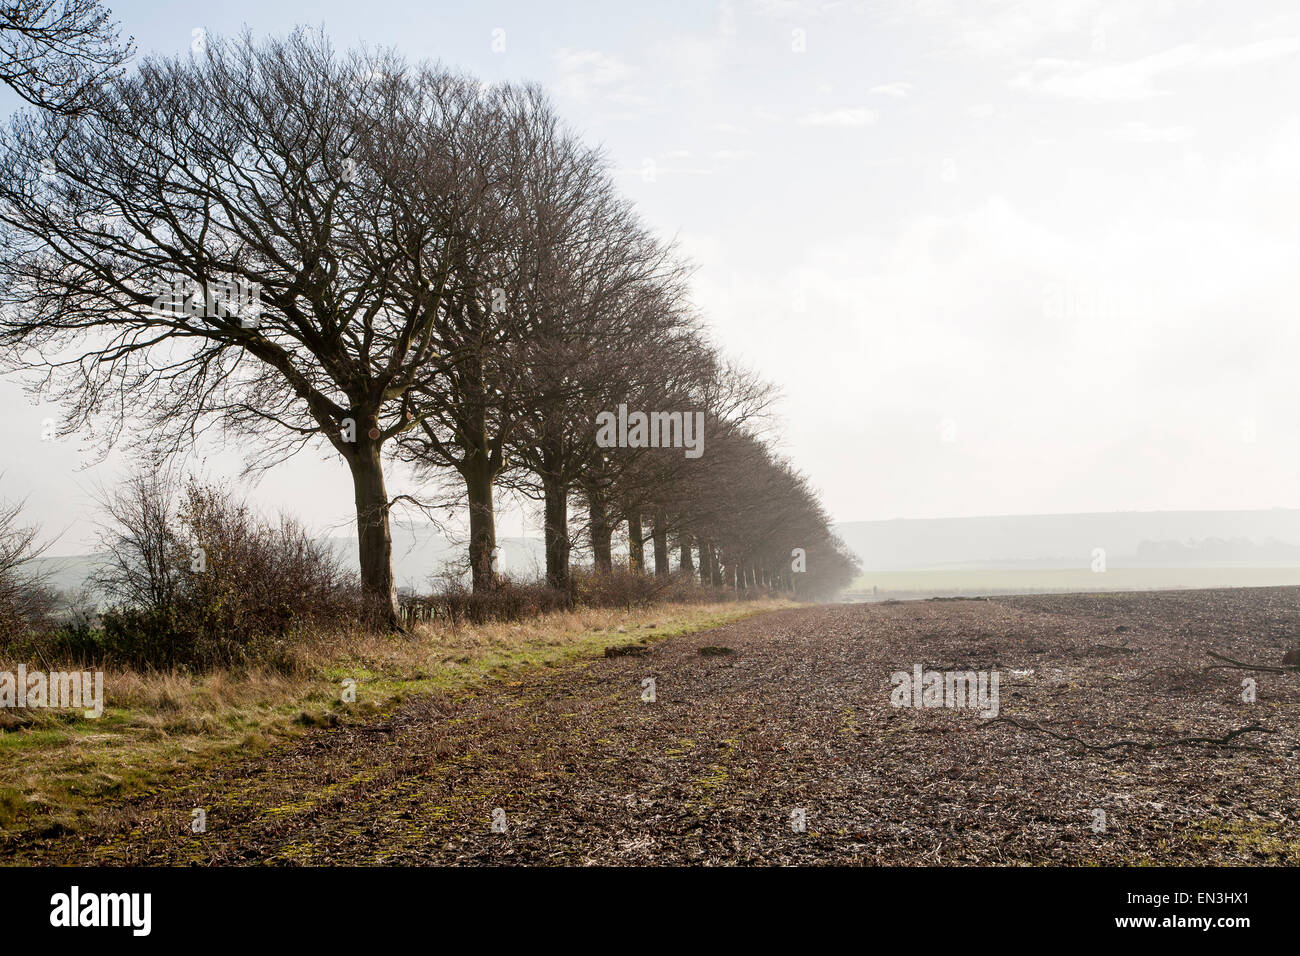 A line of leafless winter trees on field boundary, near Wroughton, Wiltshire, England, UK Stock Photo